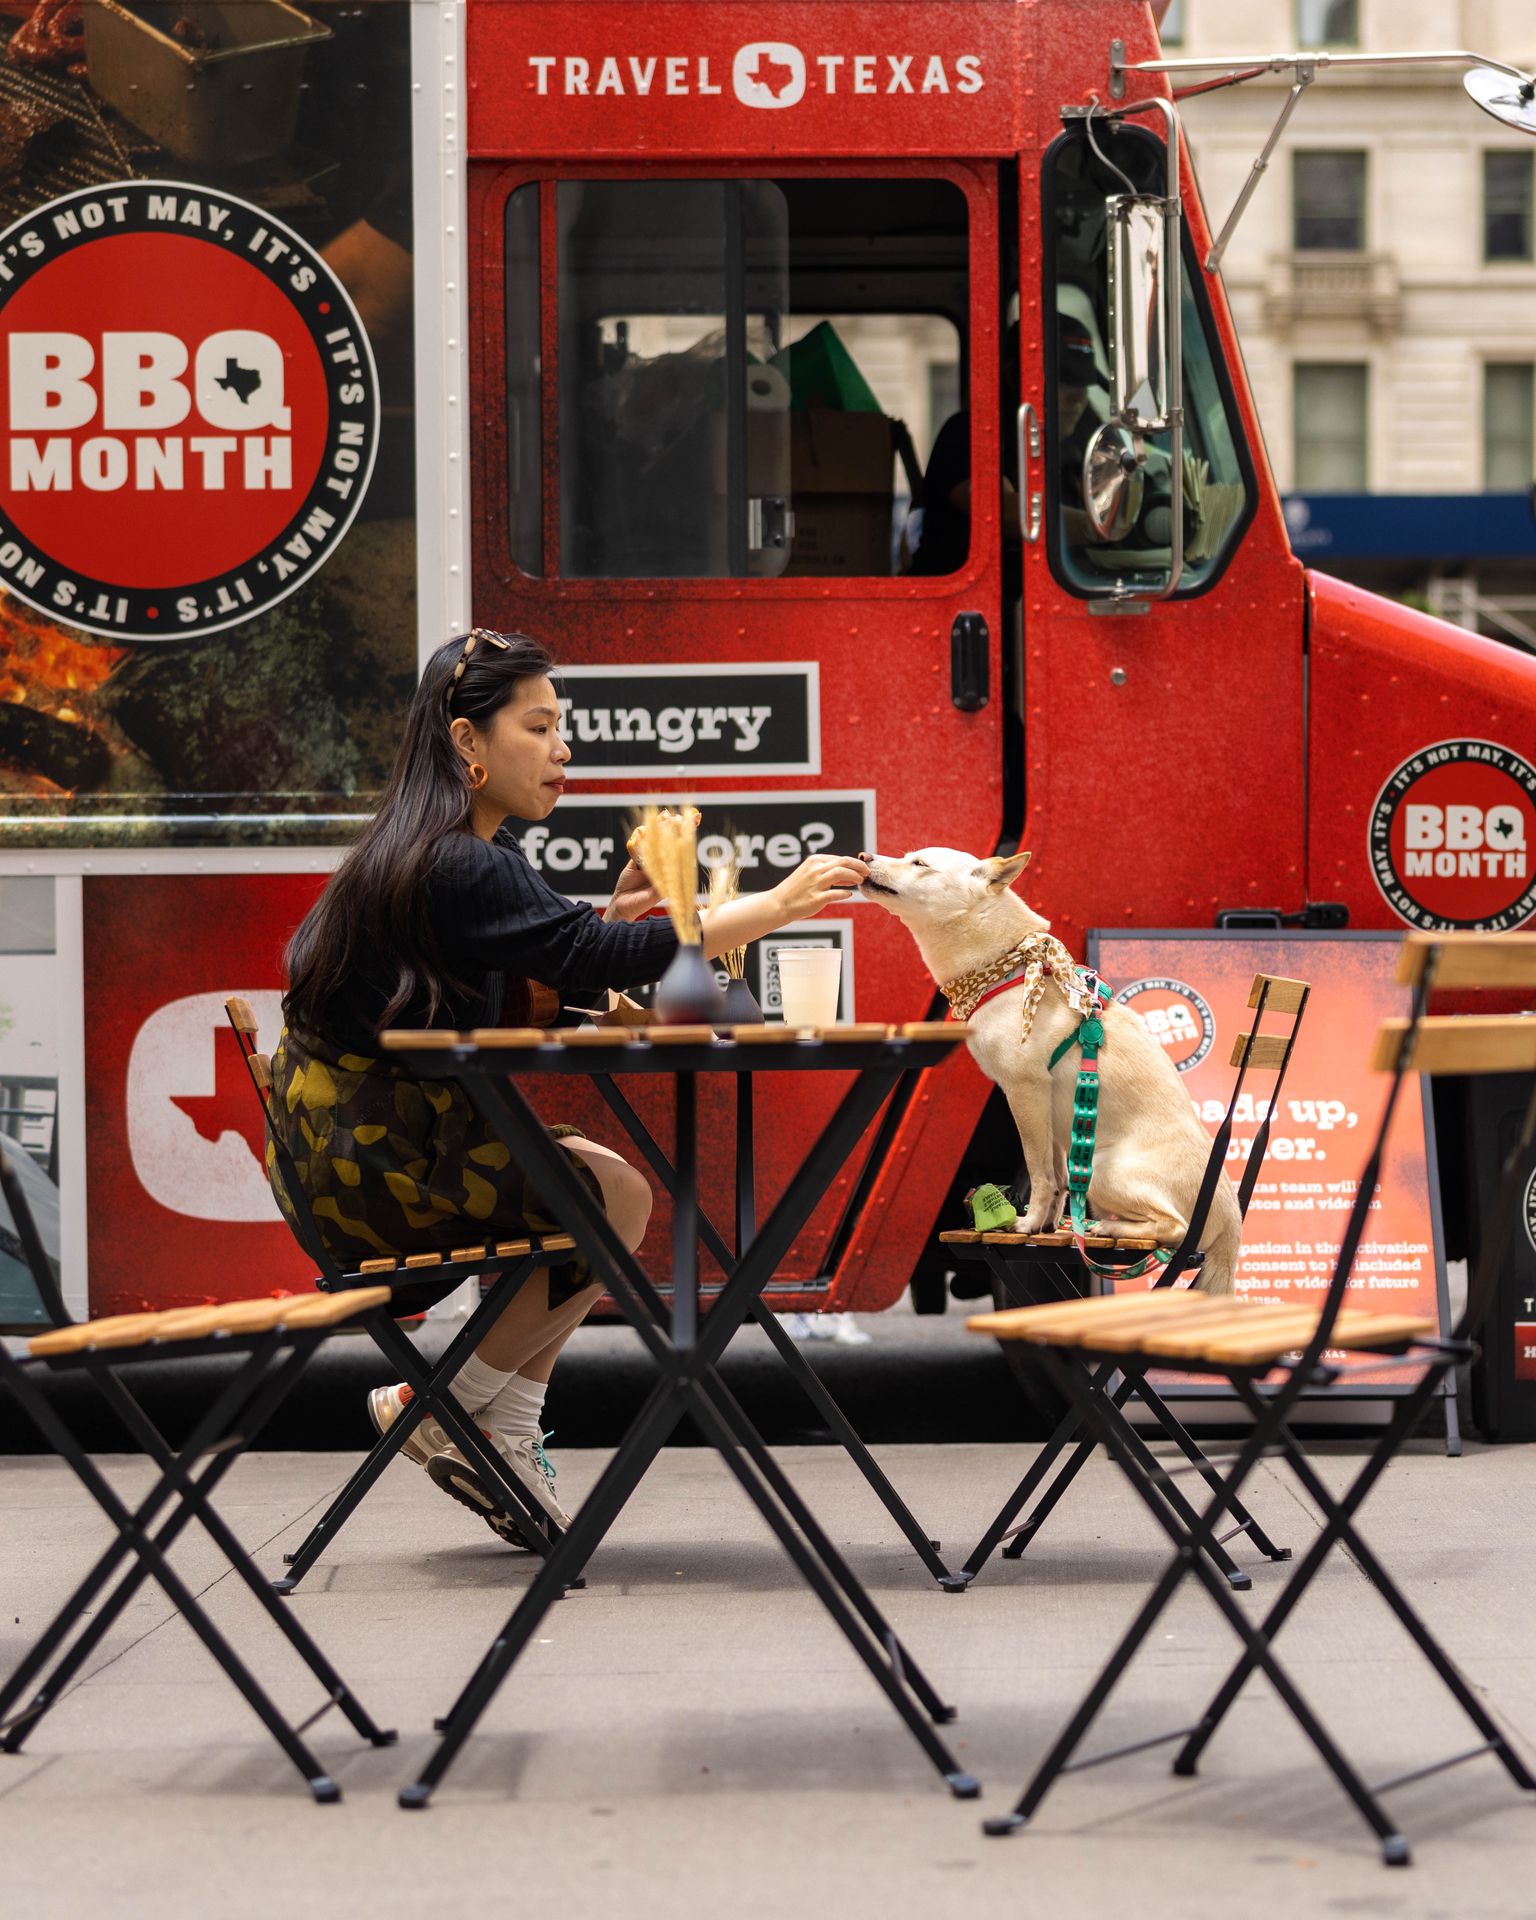 Travel Texas promotion in NYC for BBQ Month.